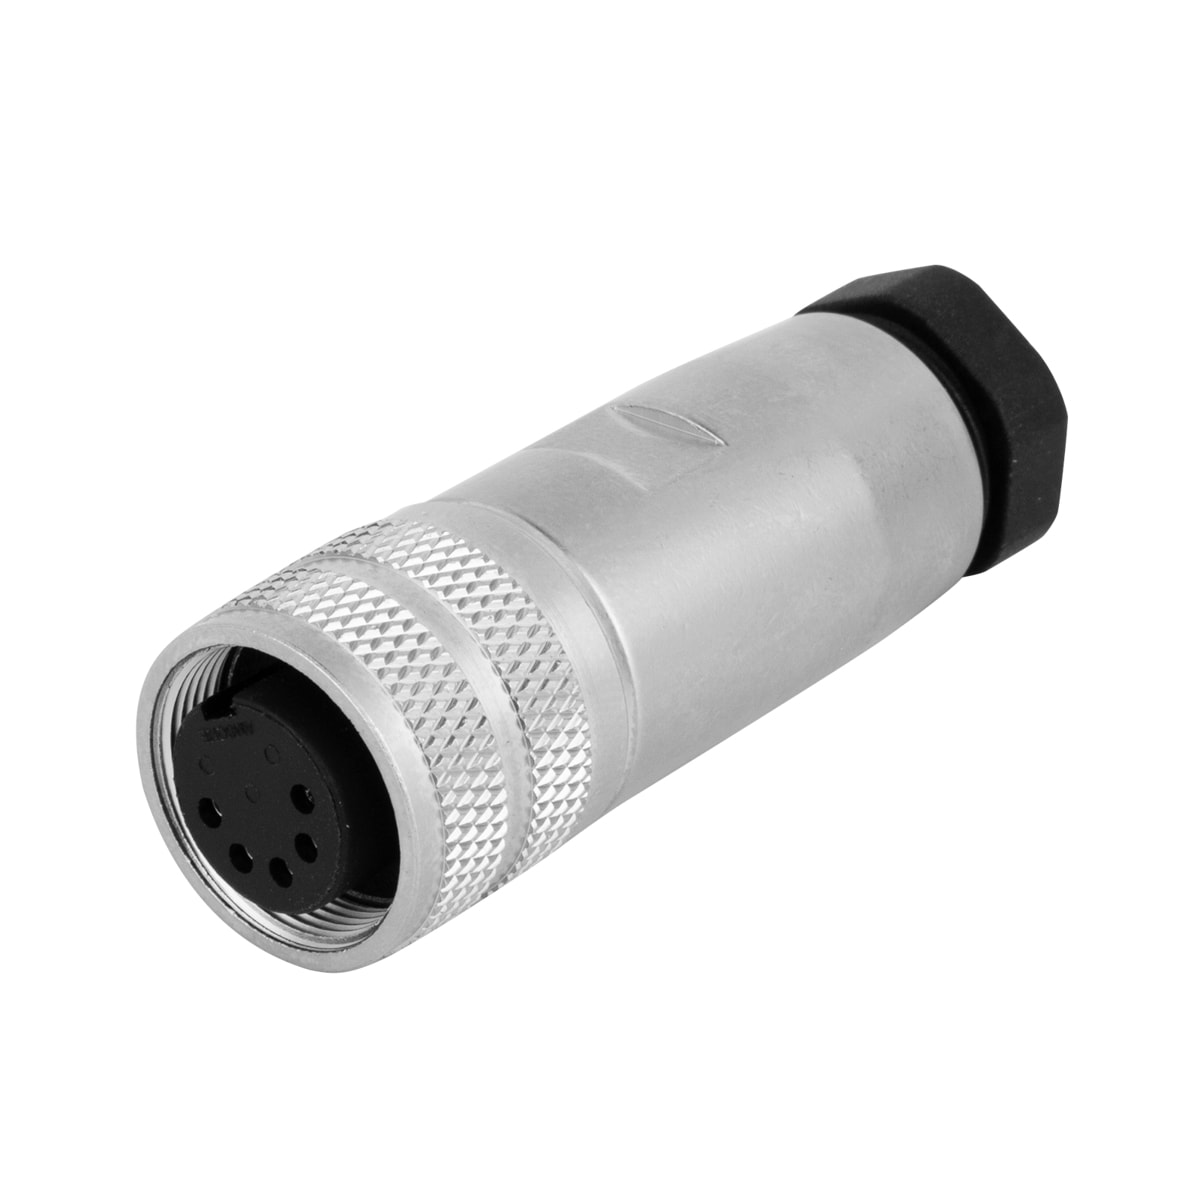 M16 cable connector, female, contacts:5,7,8,field assembly type, solder connection, straight, IP67, UL certified